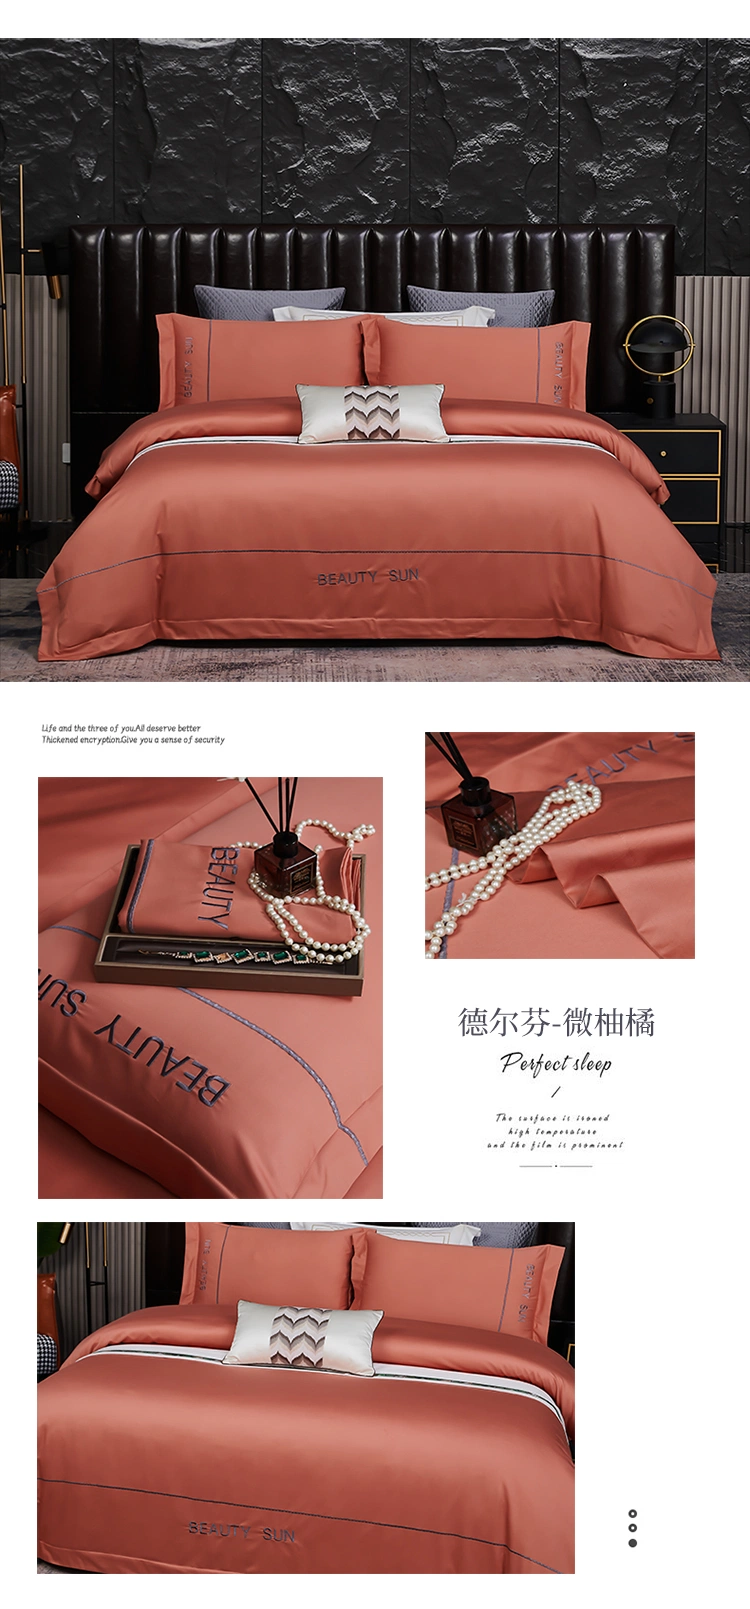 Wholesale Breathable Home Textile Luxury 4 Piece Bed Solid Queen 100% Bamboo 300tc Bed Sheet Bedding Set Duvet